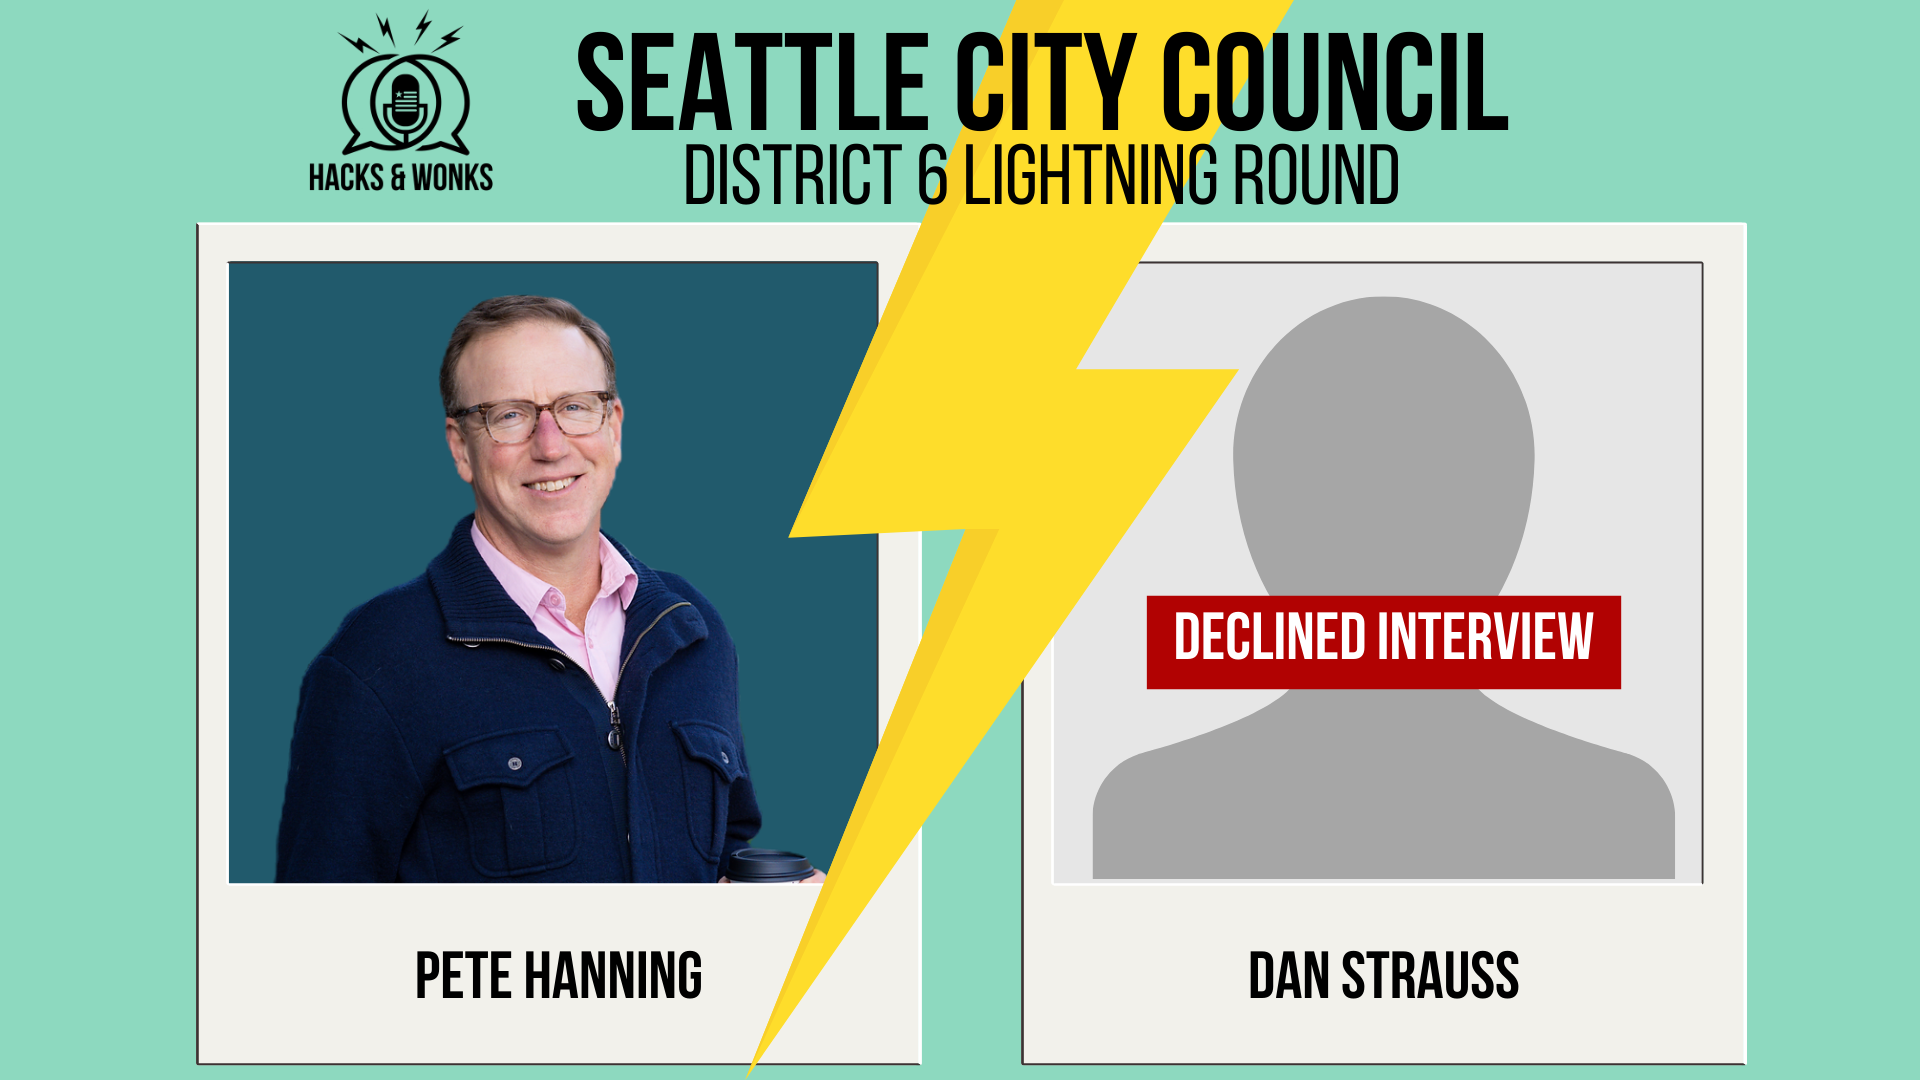 Lightning bolt divides District 6 candidates: Pete Hanning (campaign photo) and Dan Strauss (placeholder image with “Declined Interview” across it)